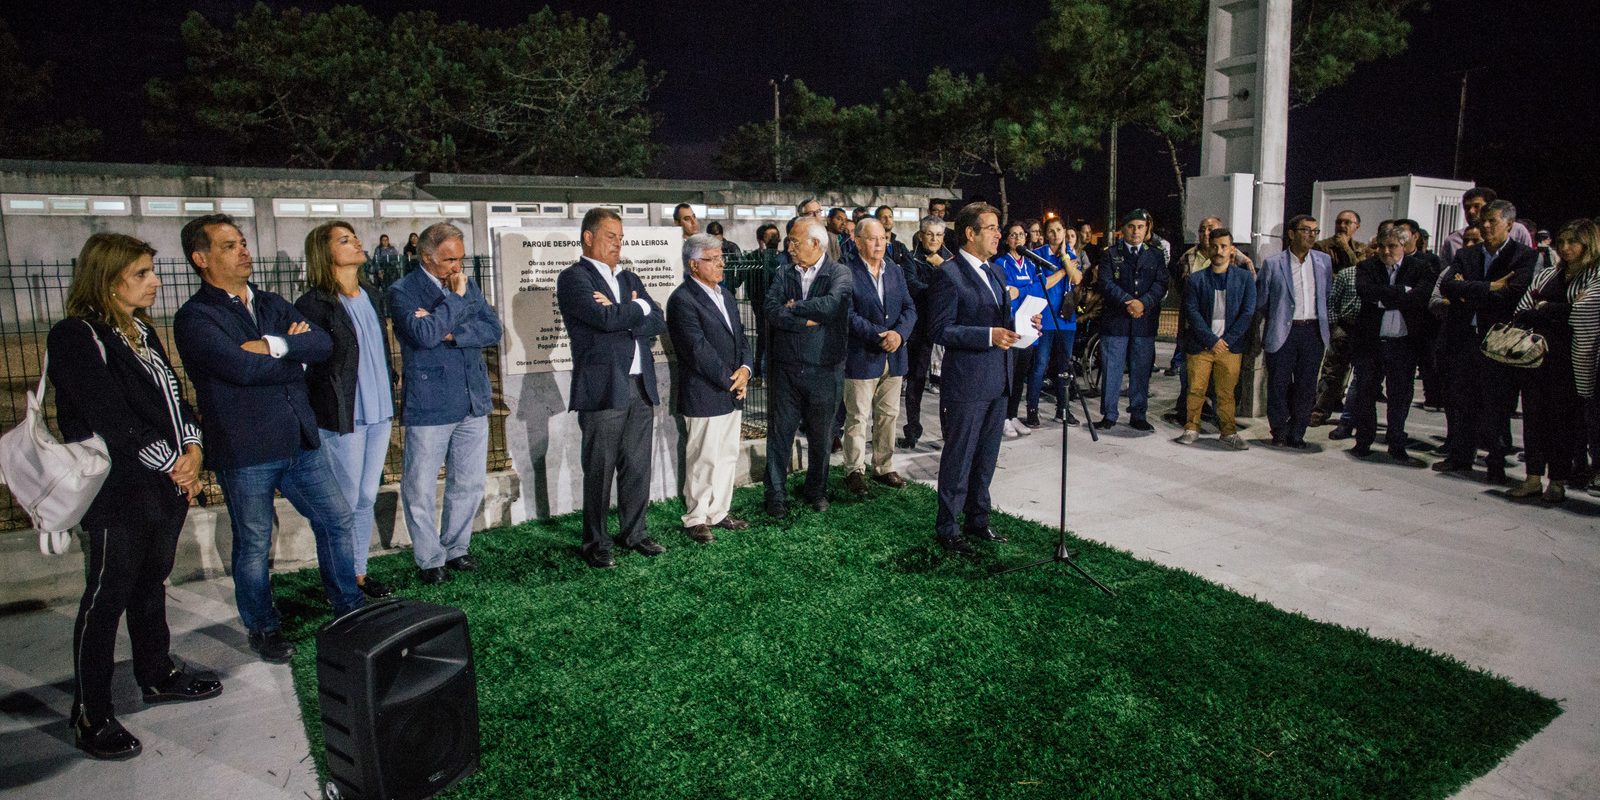 Celbi Administrator speaks at the inauguration of the sports complex of the Praia da Leirosa club